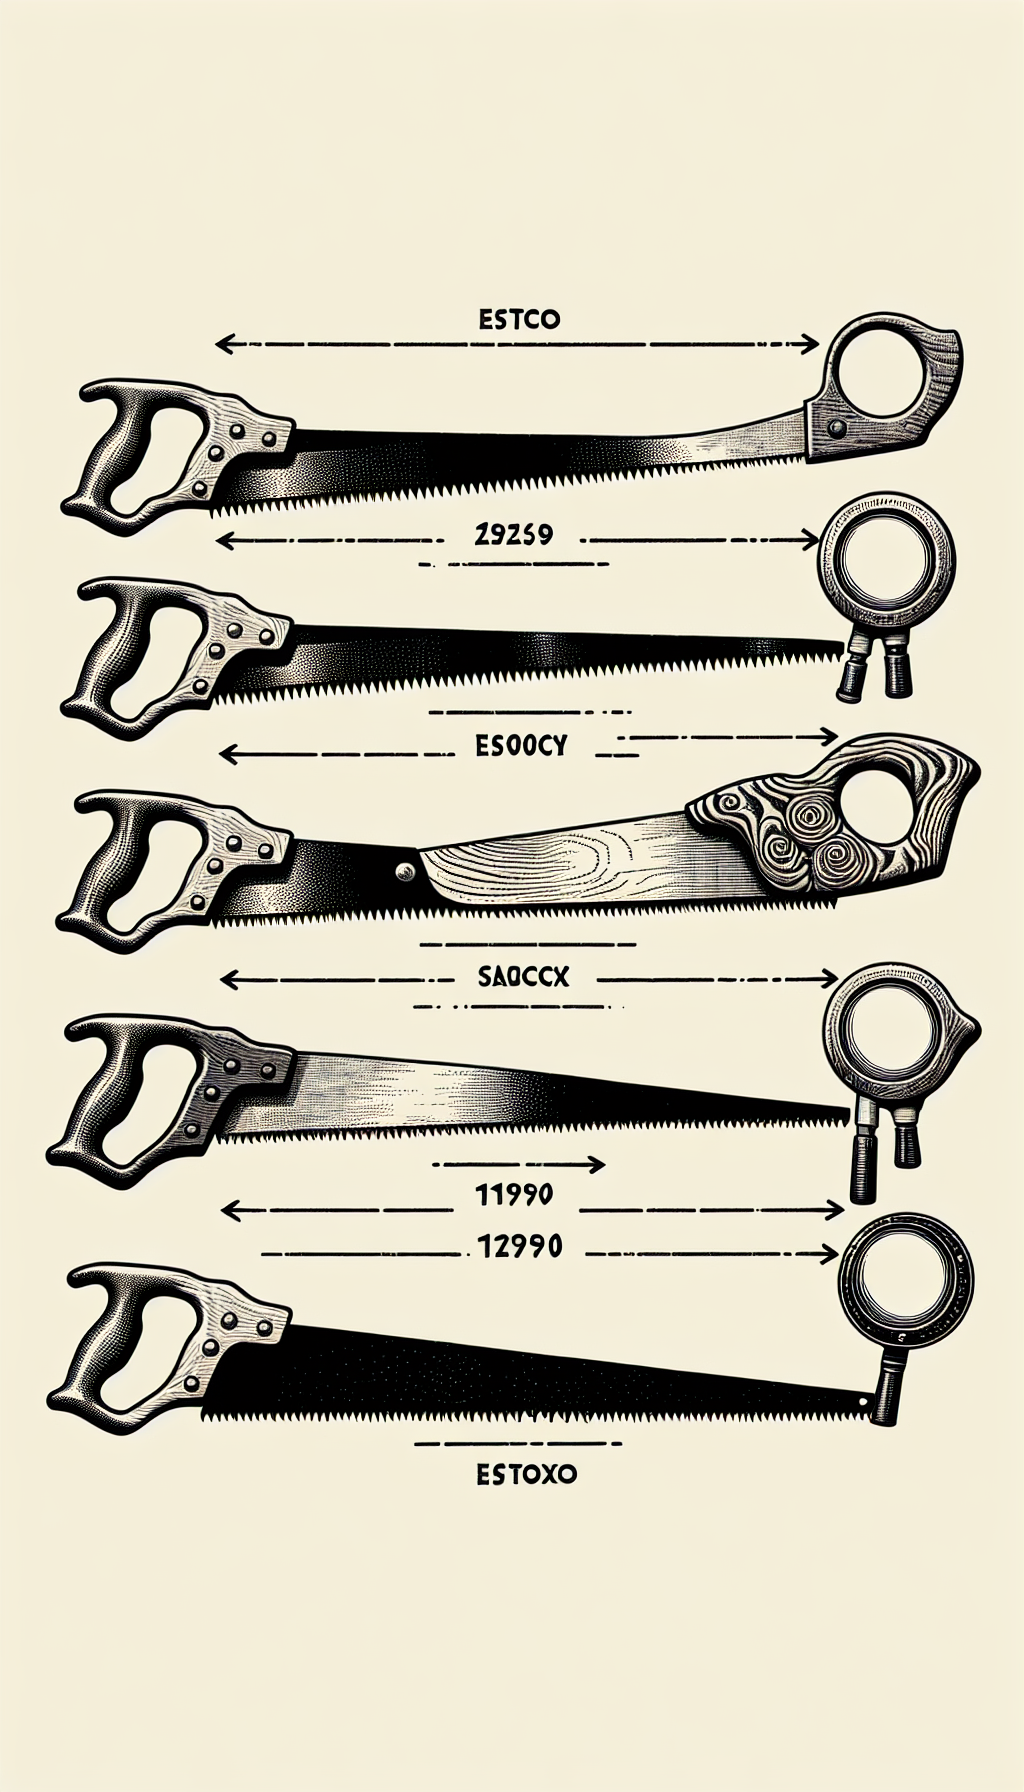 An illustration depicts a set of saw handles morphing from rough, historical designs into modern, ergonomic shapes, each segmented by era. The most antique handle frames a magnifying glass that reveals unique engravings, symbolizing the fine details in identifying antique crosscut saws. The styles range from woodcut to sleek digital lines, reflecting the evolution from past to present.